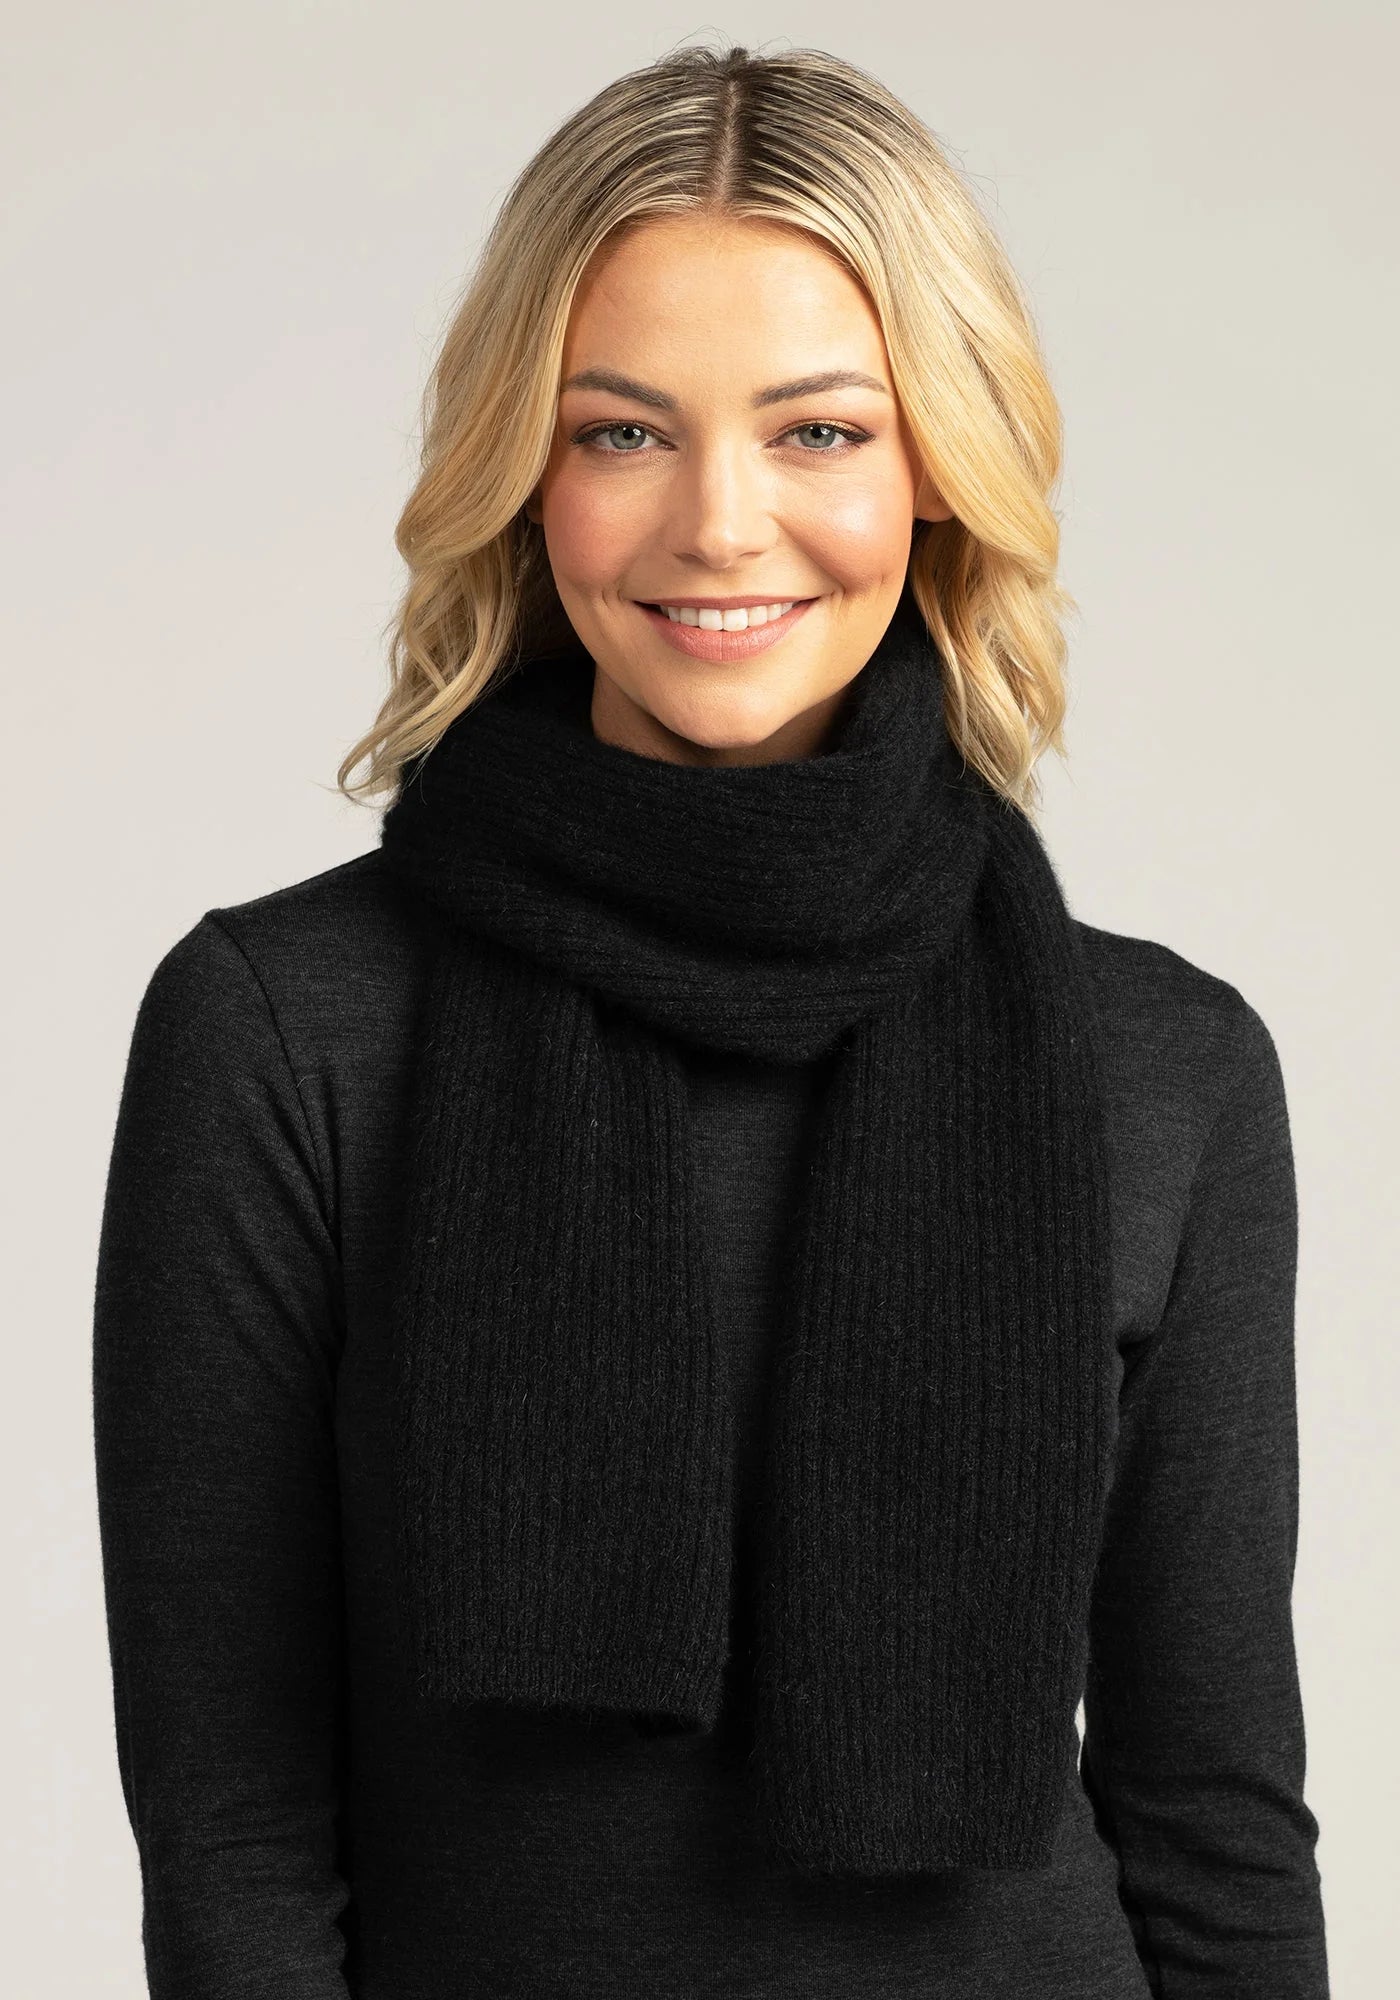 Complete your winter look with our black merino wool ribbed scarf. Luxurious warmth for any occasion.